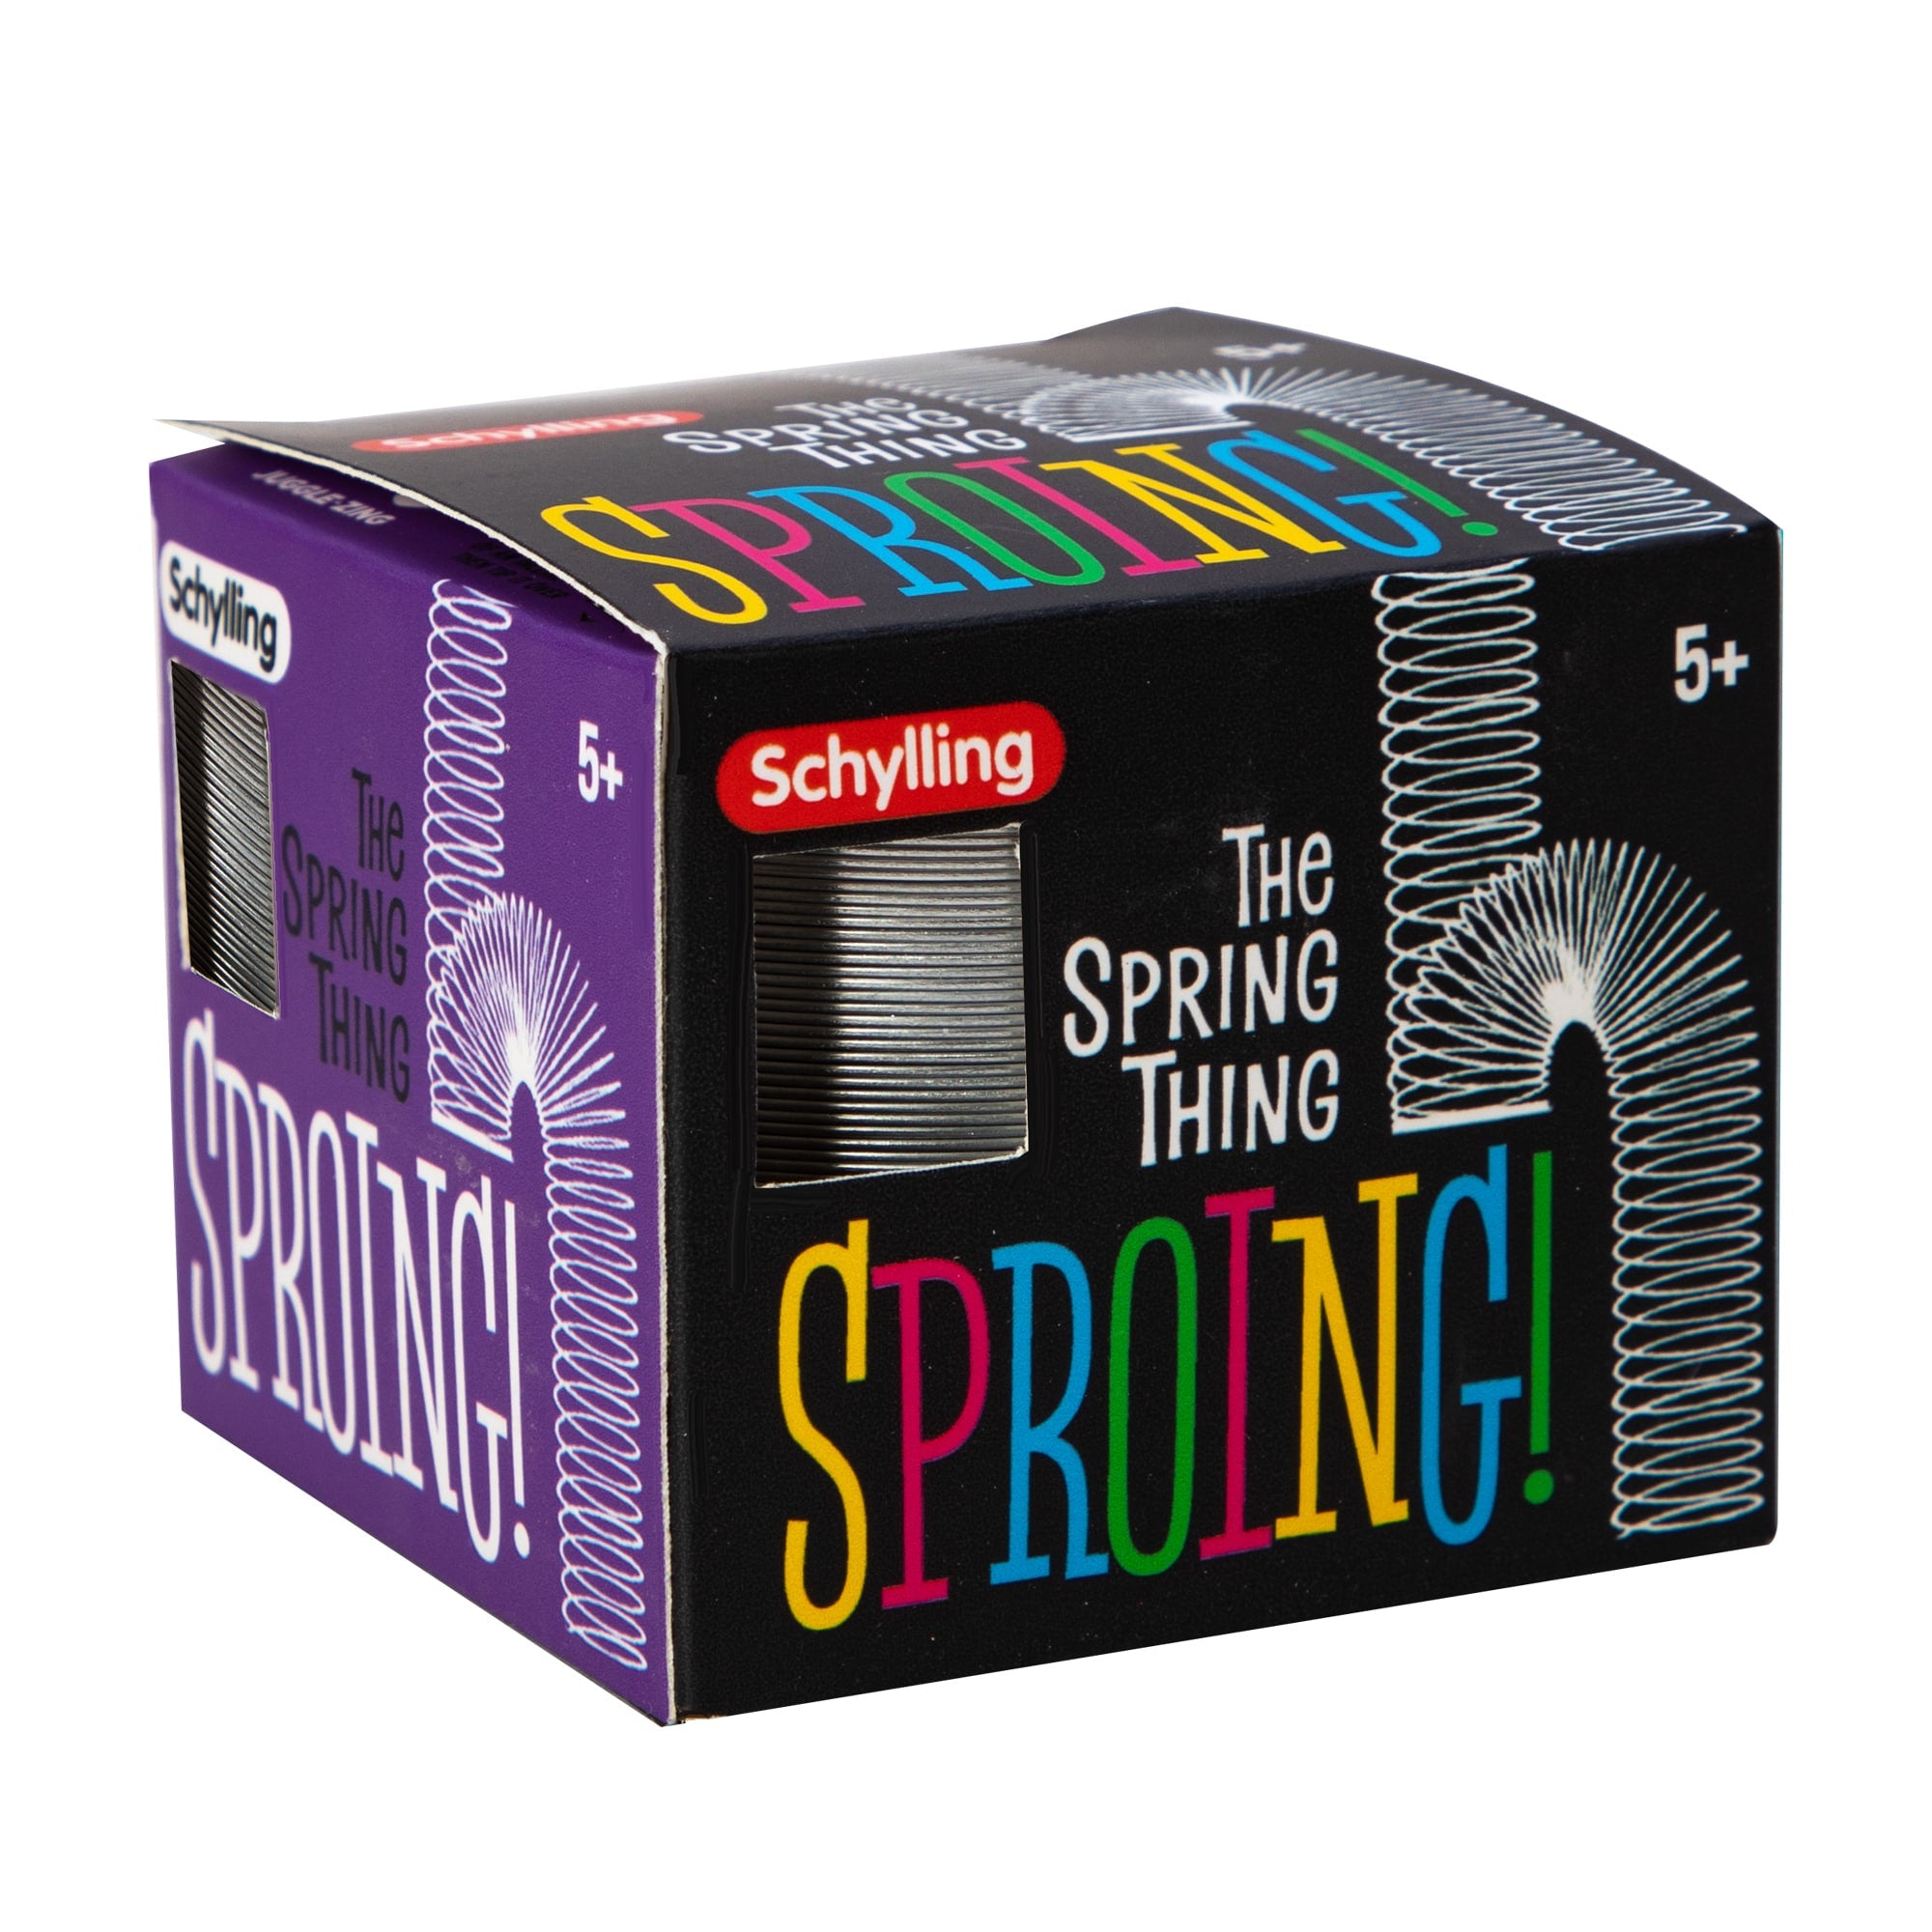 SPROING! the Spring Thing